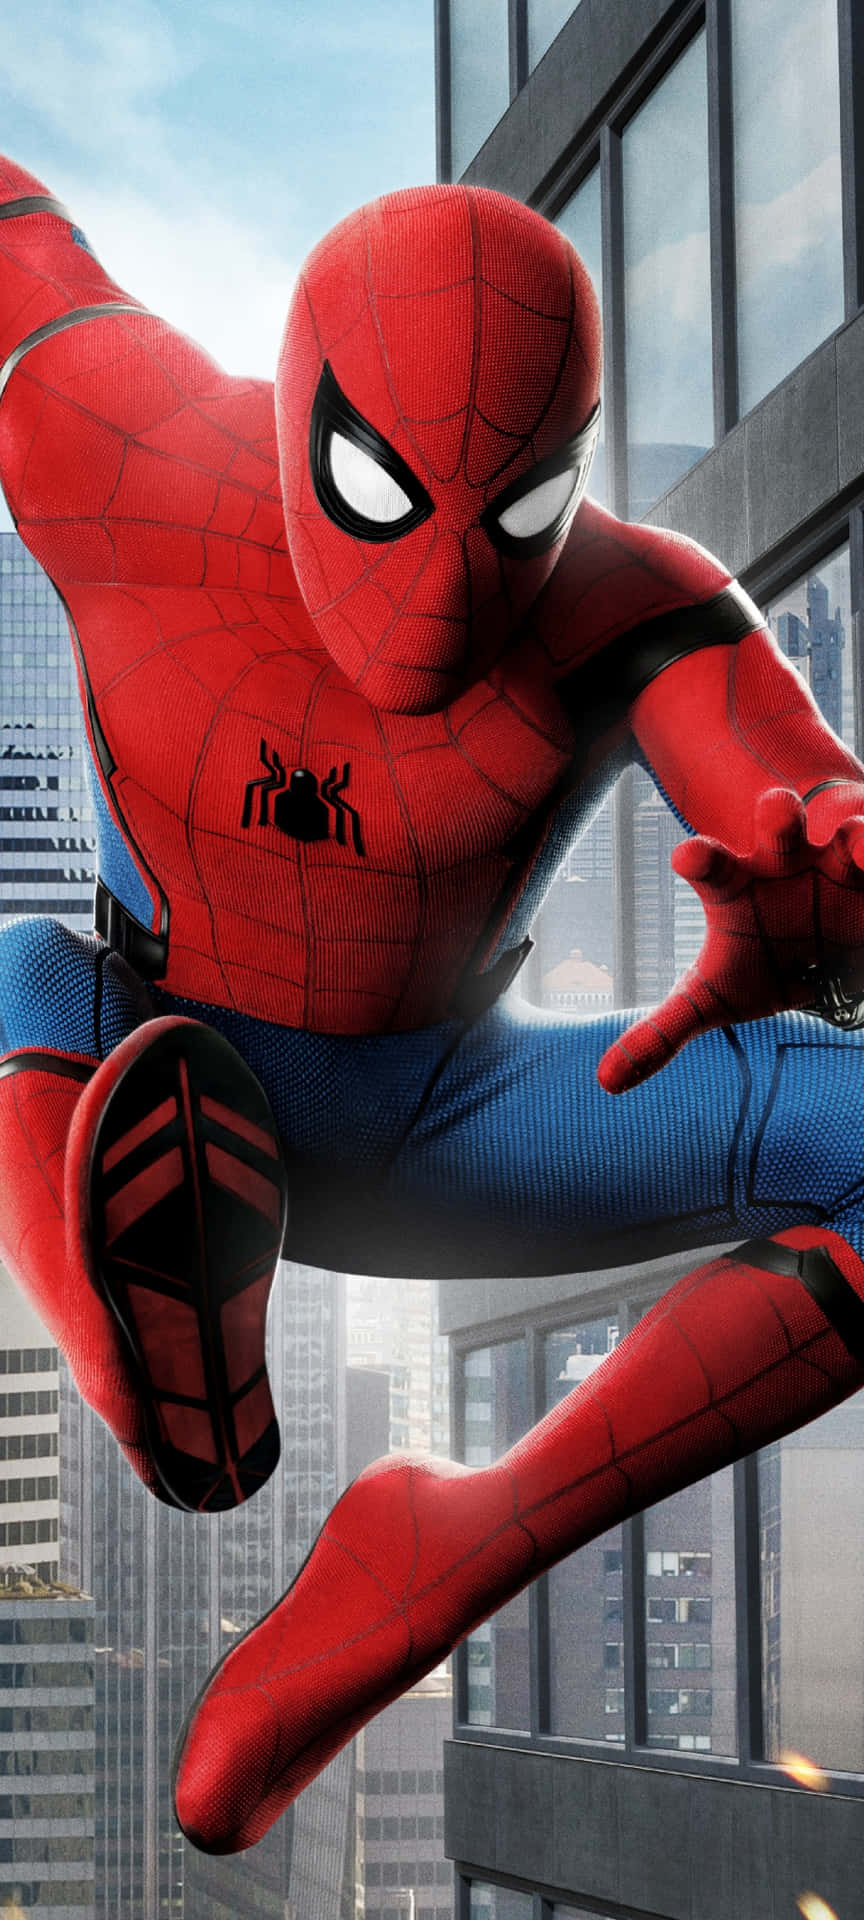 Two of the most iconic Marvel characters, Spider Man and Iron Man, face off Wallpaper